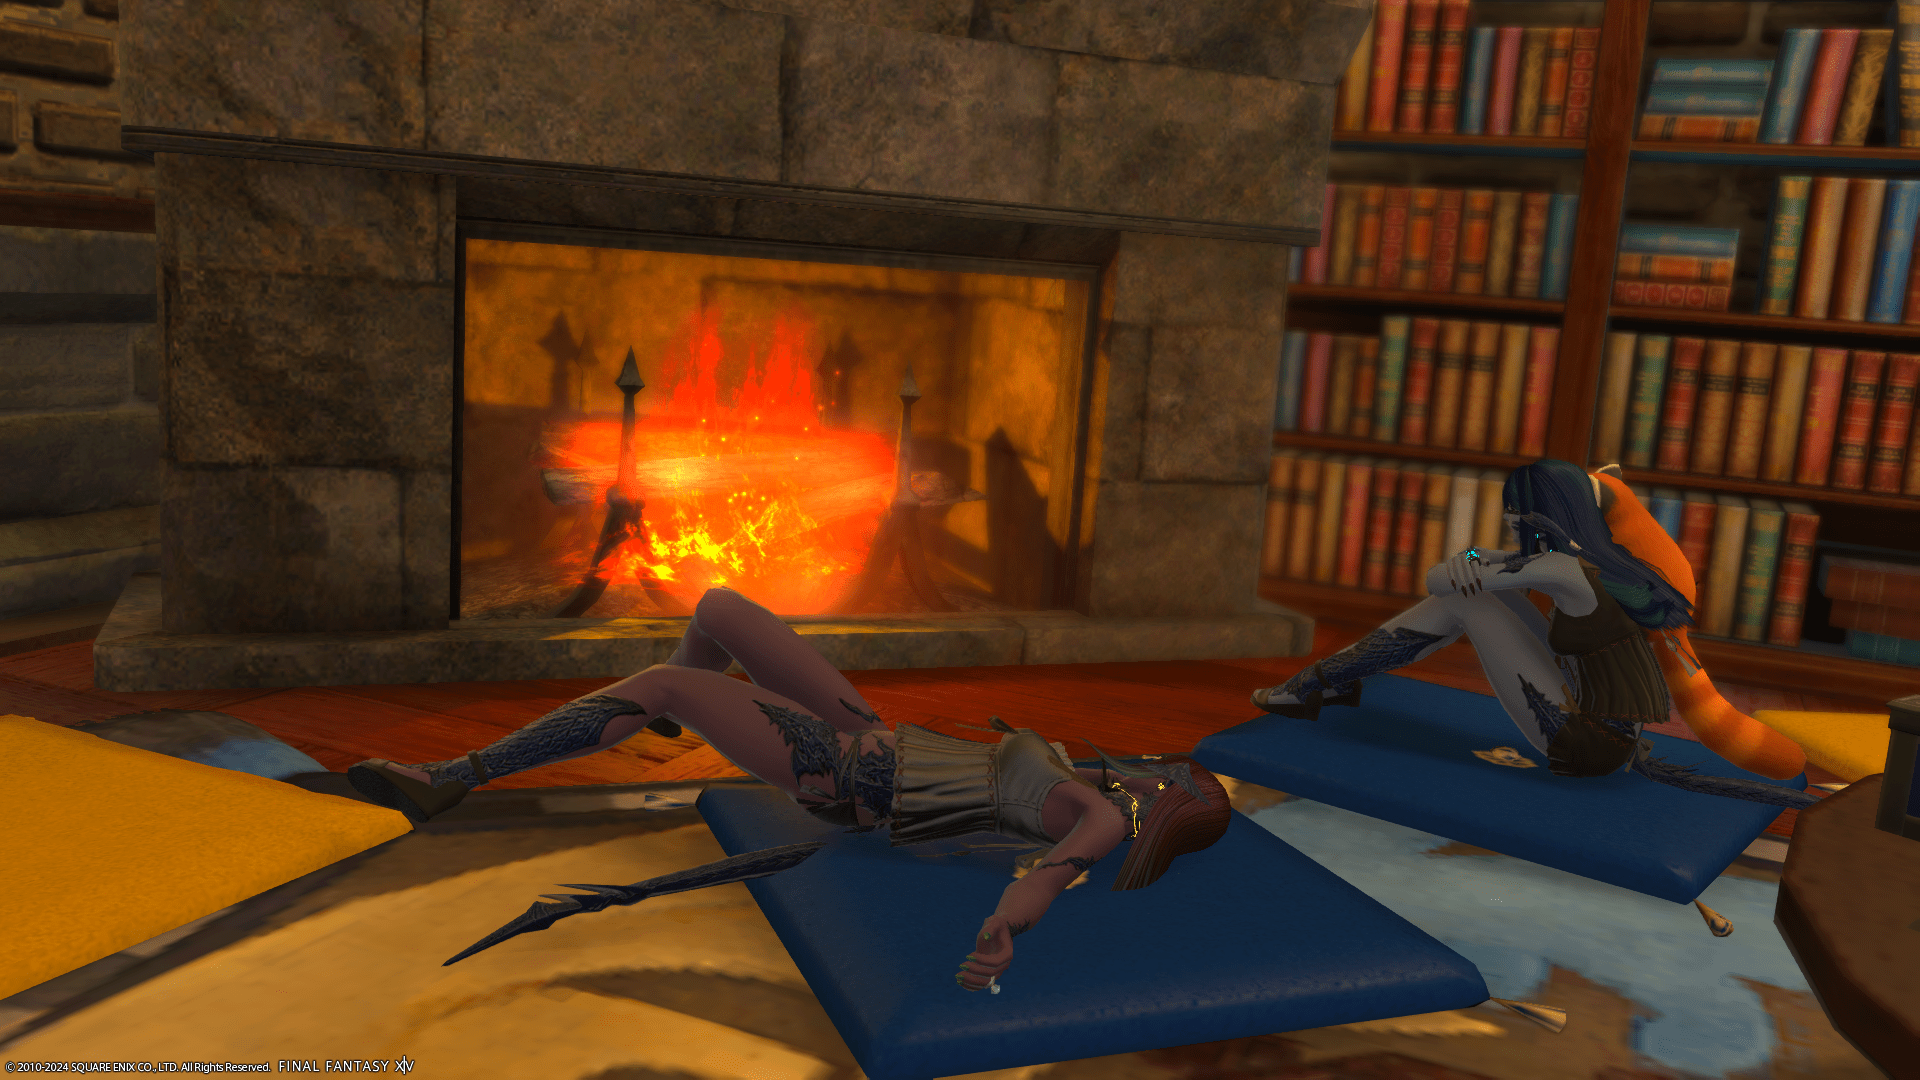 Lizicus and Laureine basking in front of a large stone fireplace.